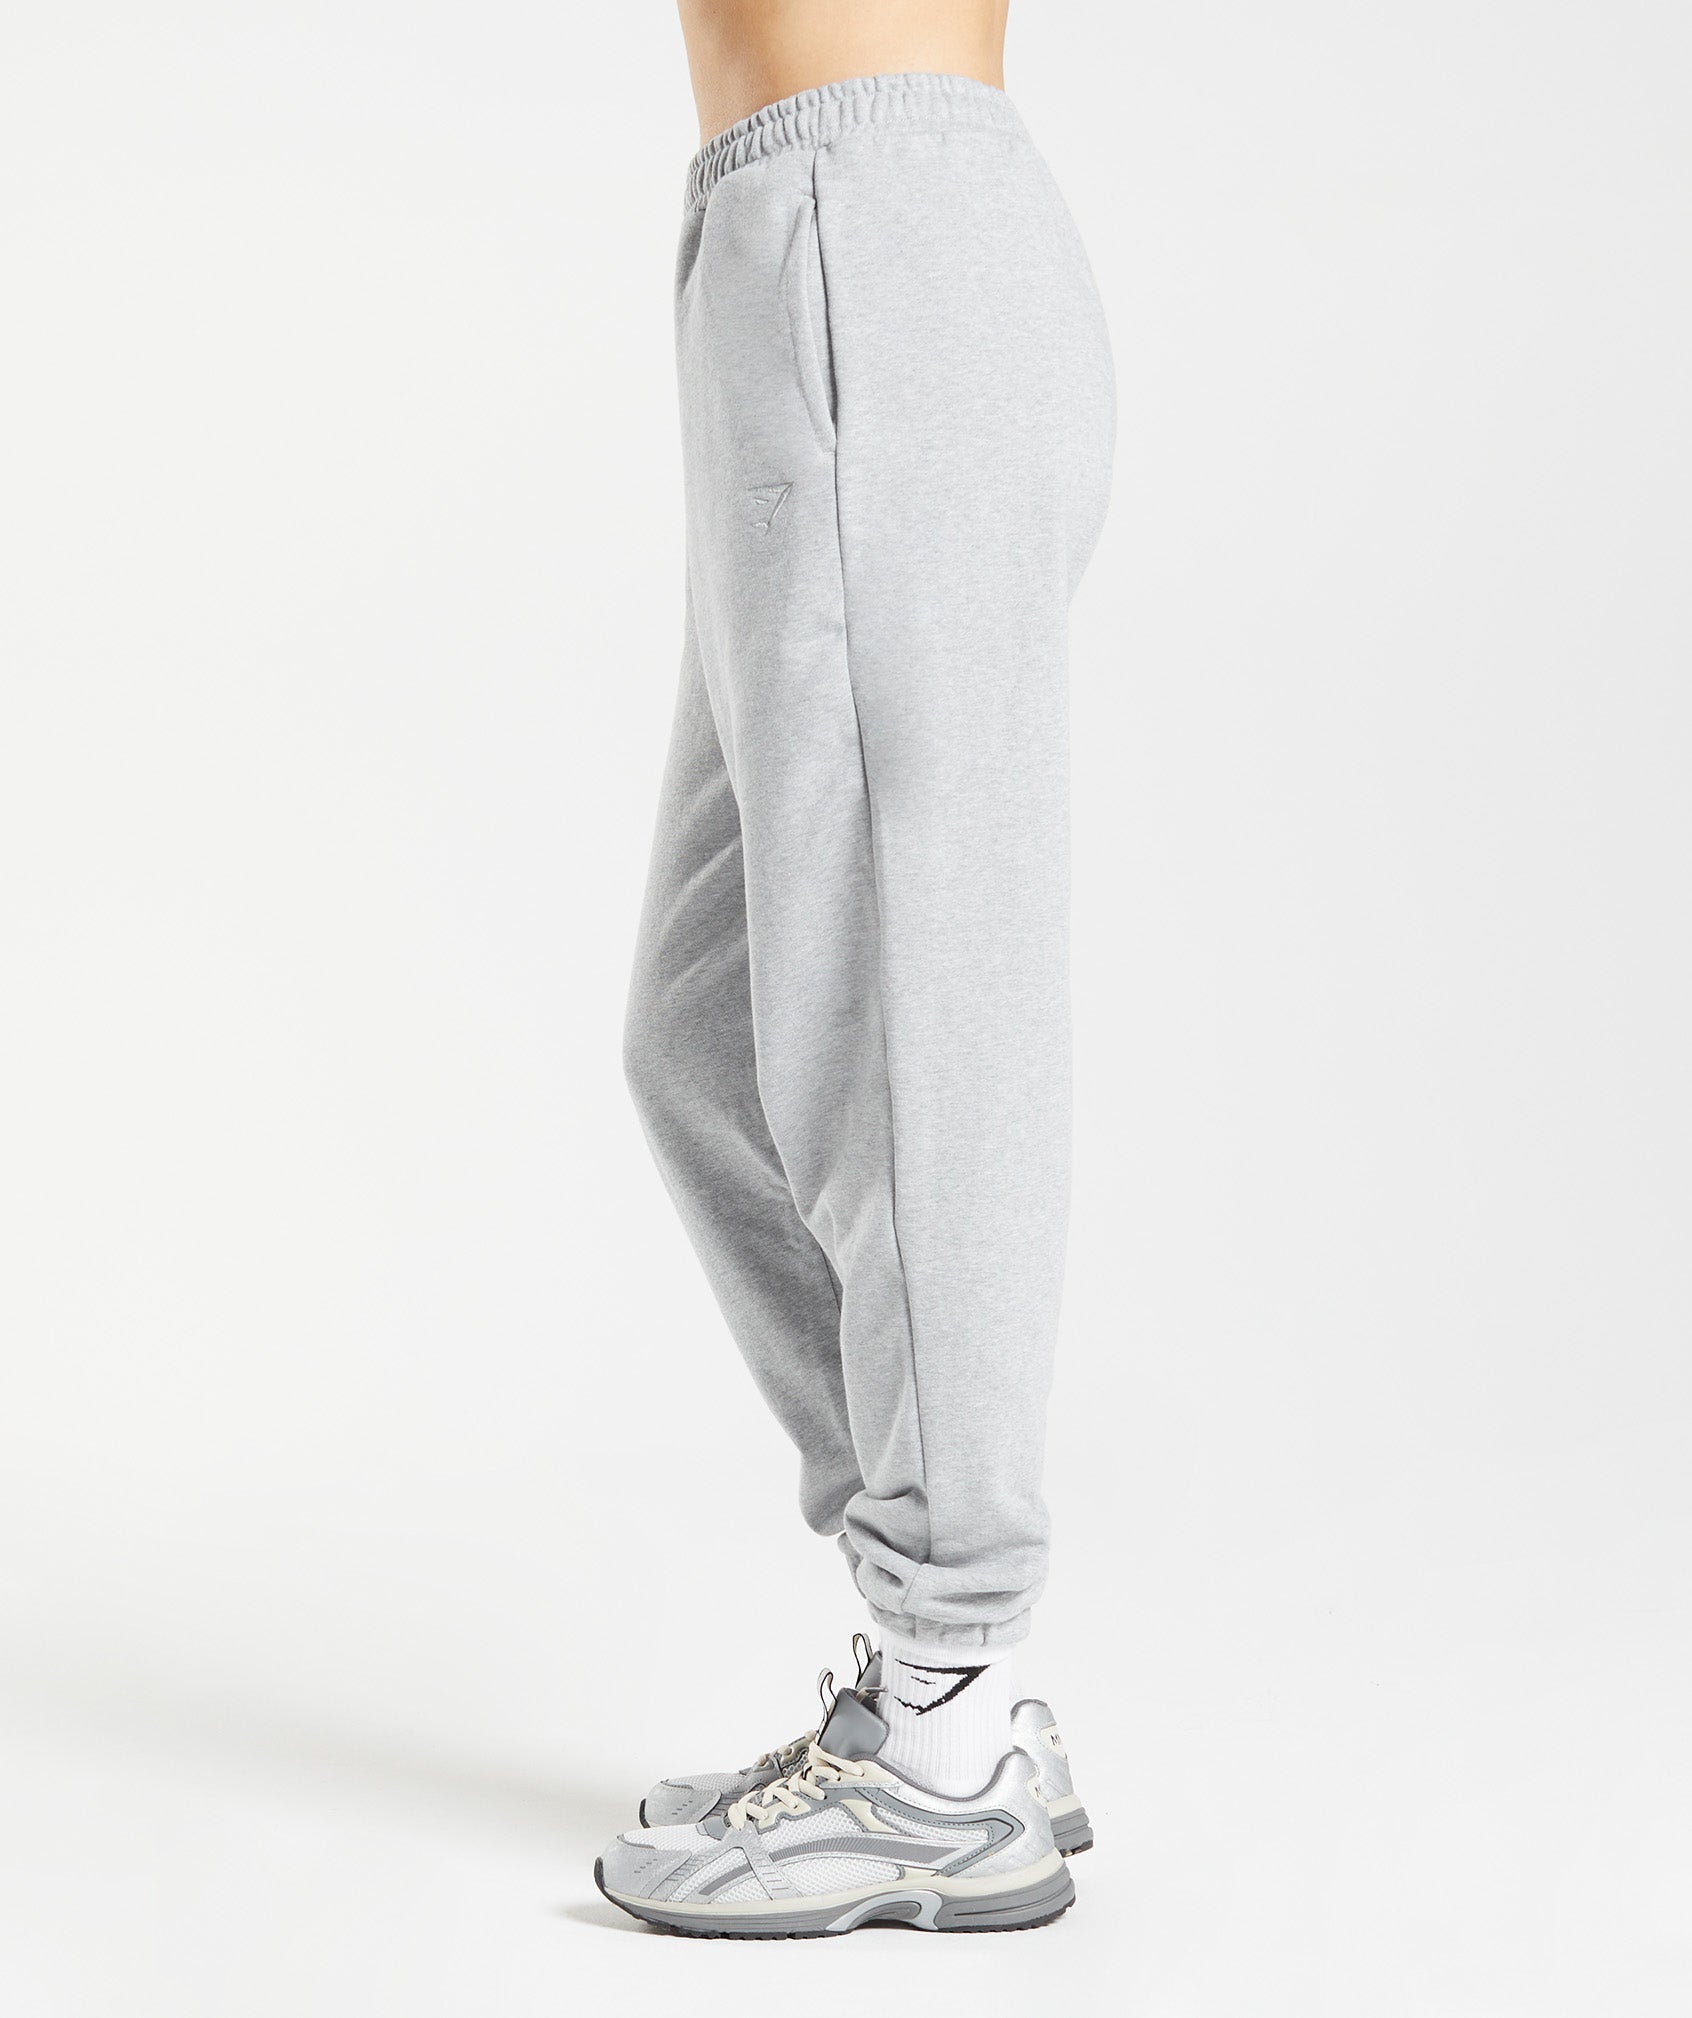 Rest Day Sweats Joggers in Light Grey Core Marl - view 3